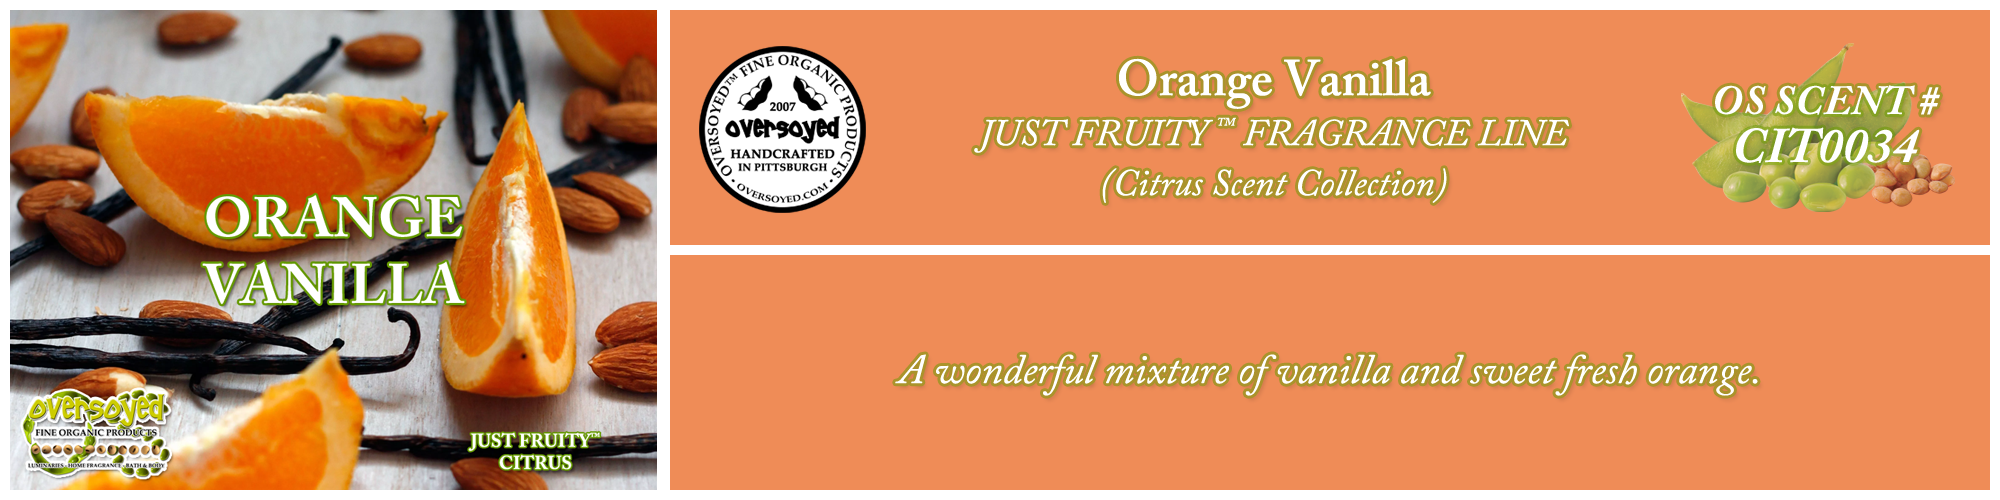 Orange Vanilla Handcrafted Products Collection